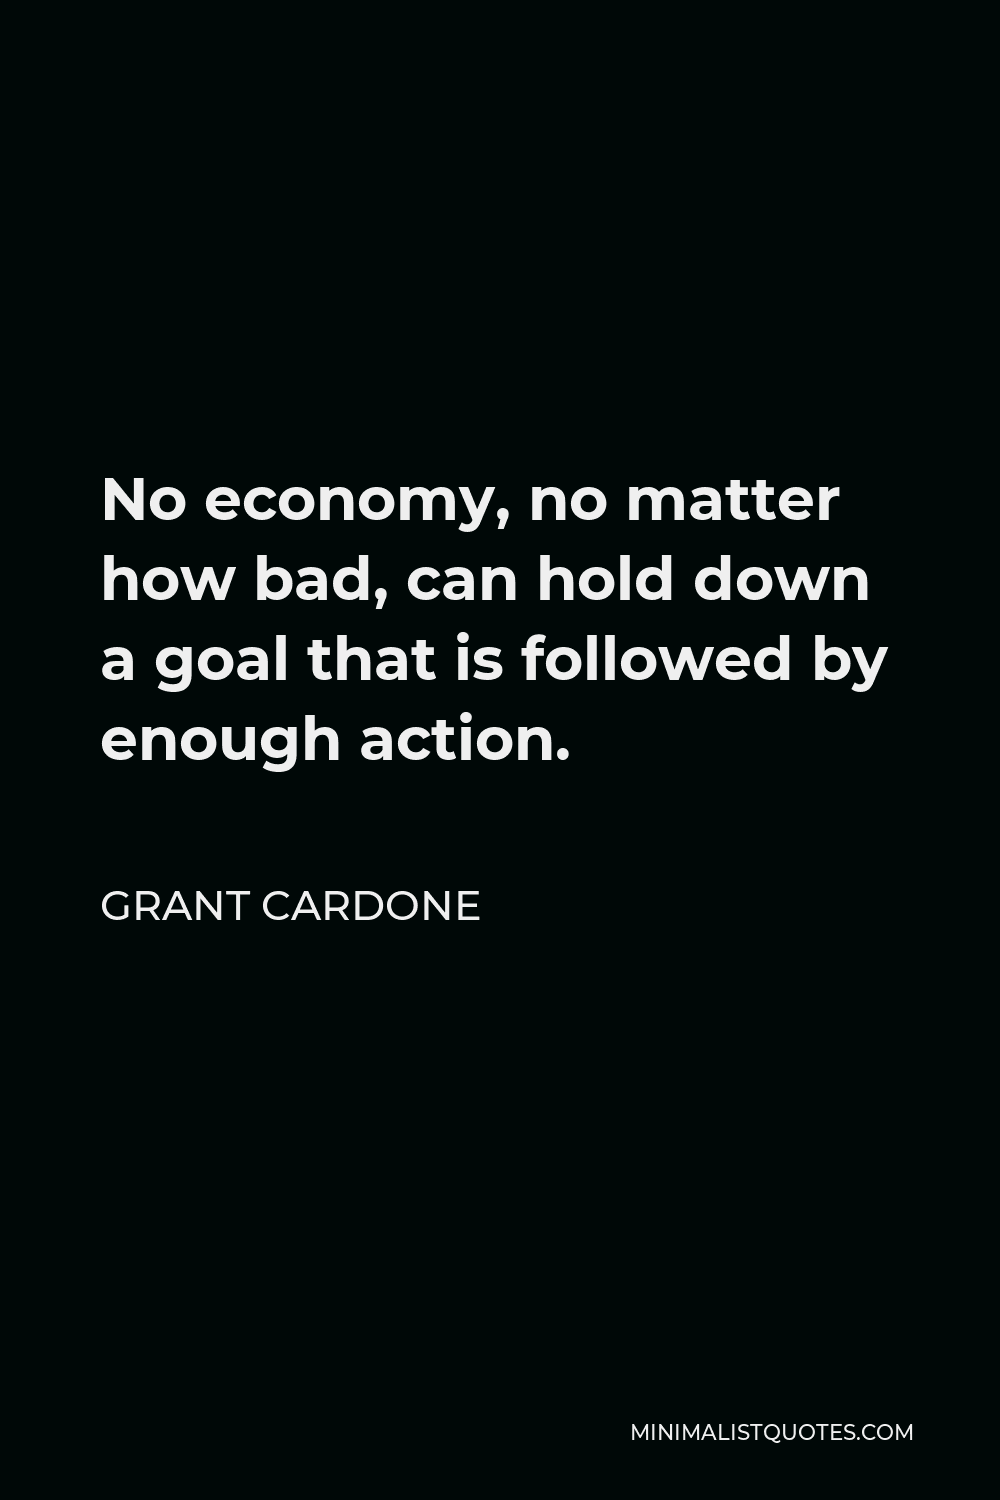 Grant Cardone Quote - No economy, no matter how bad, can hold down a goal that is followed by enough action.